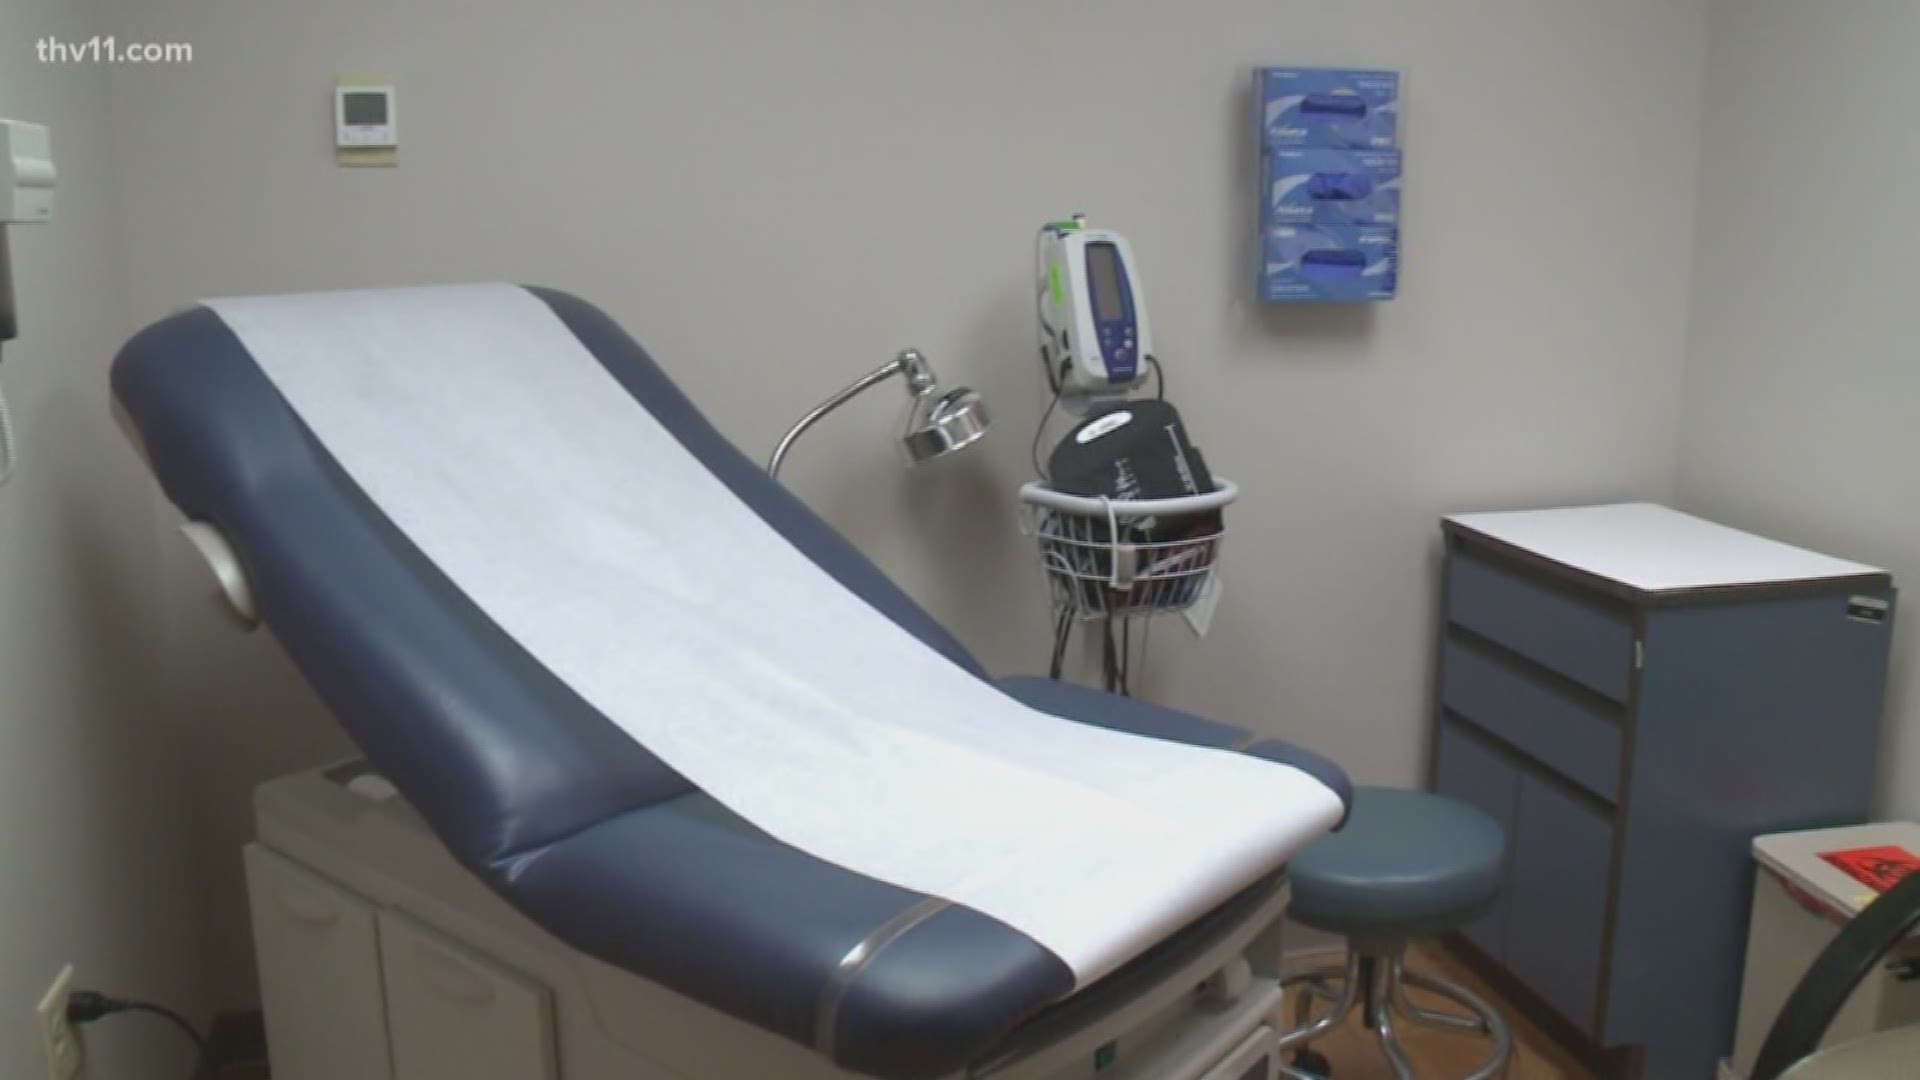 Today, there's a new clinic in Little Rock offering medical services to anyone, regardless of whether or not they can pay.